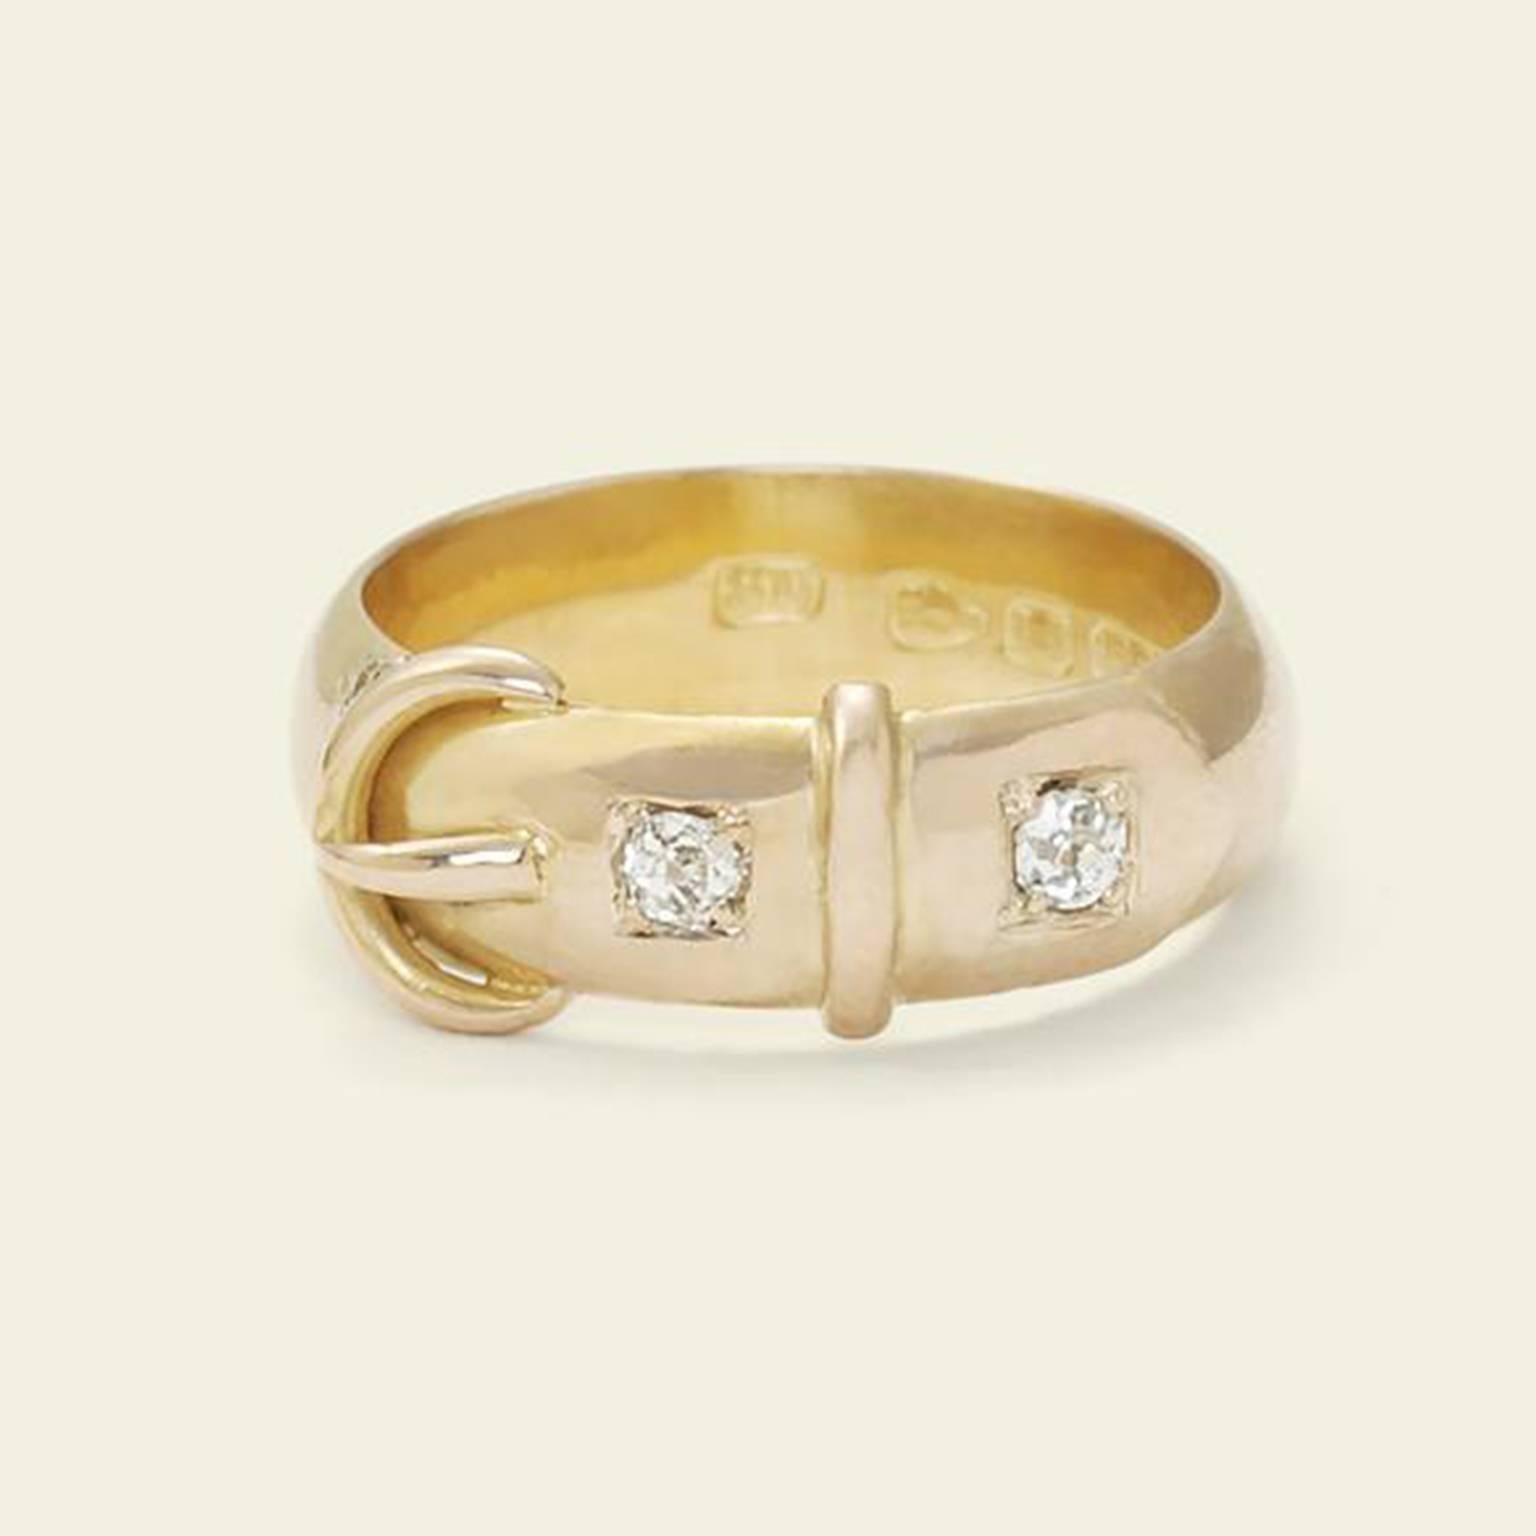 This fantastic Victorian novelty ring features a hinged belt motif panel at the face which opens to reveal the word 